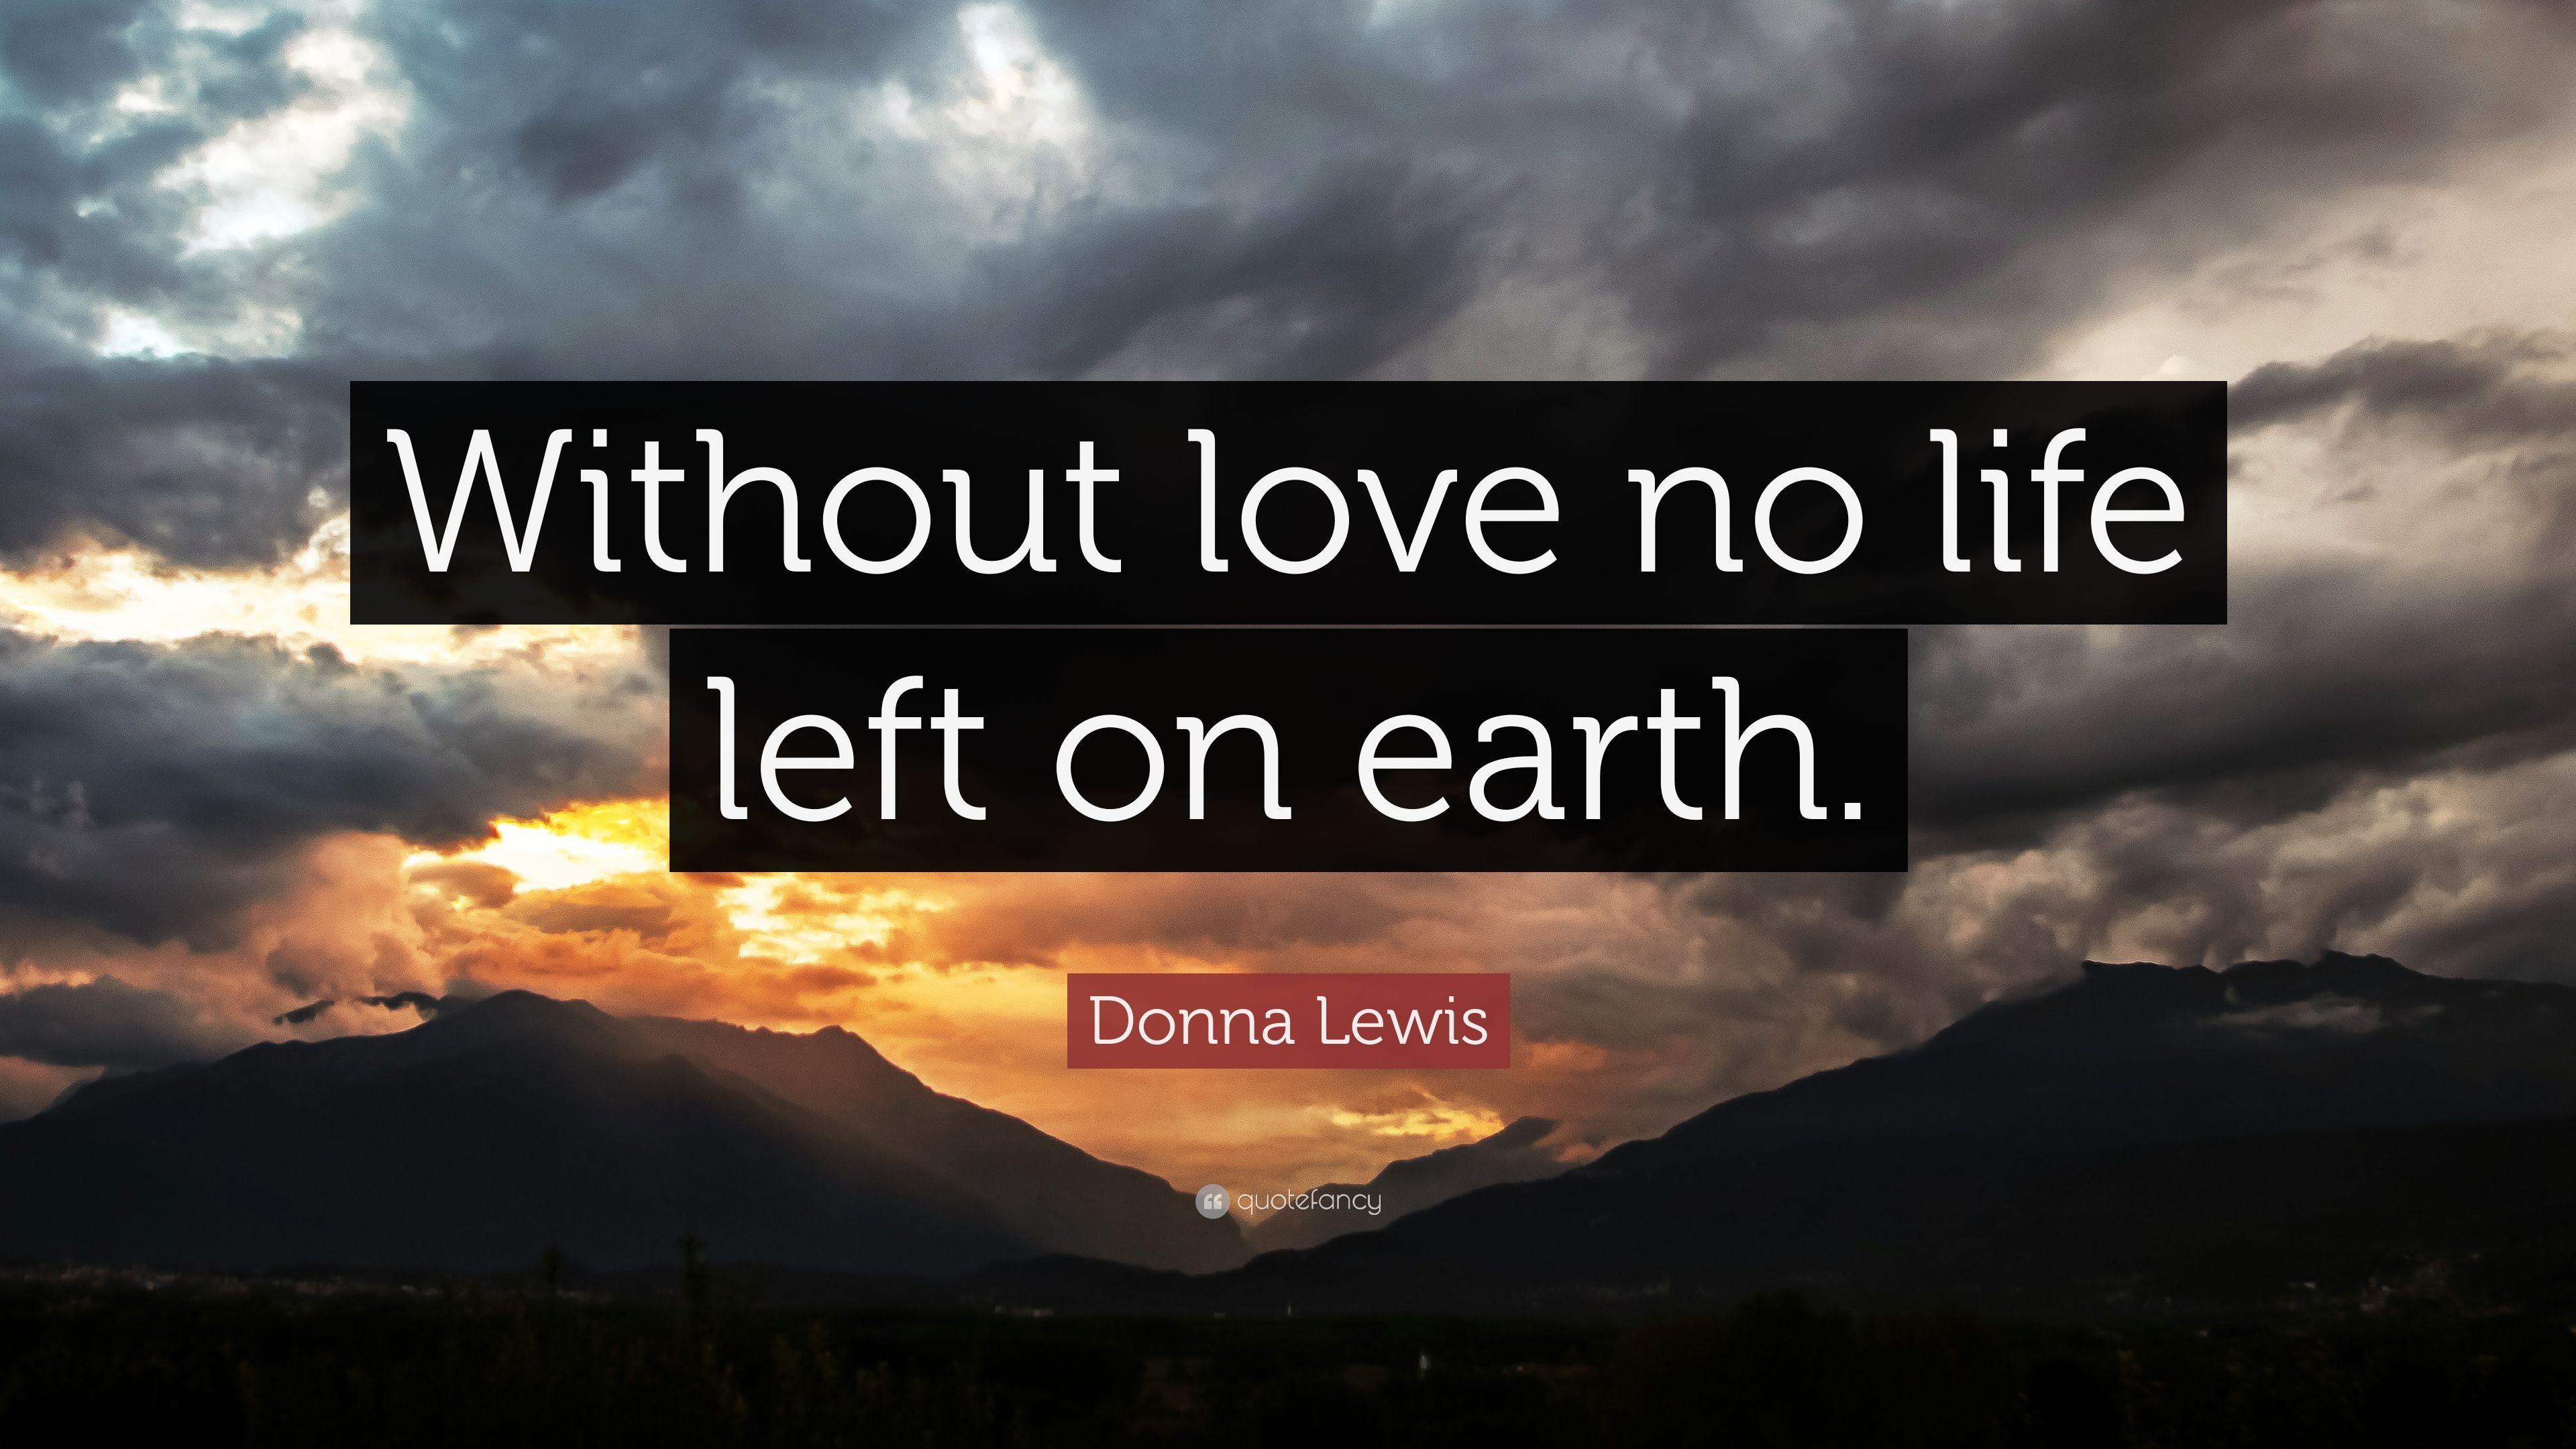 Donna Lewis Quote: “Without love no life left on earth.” 7